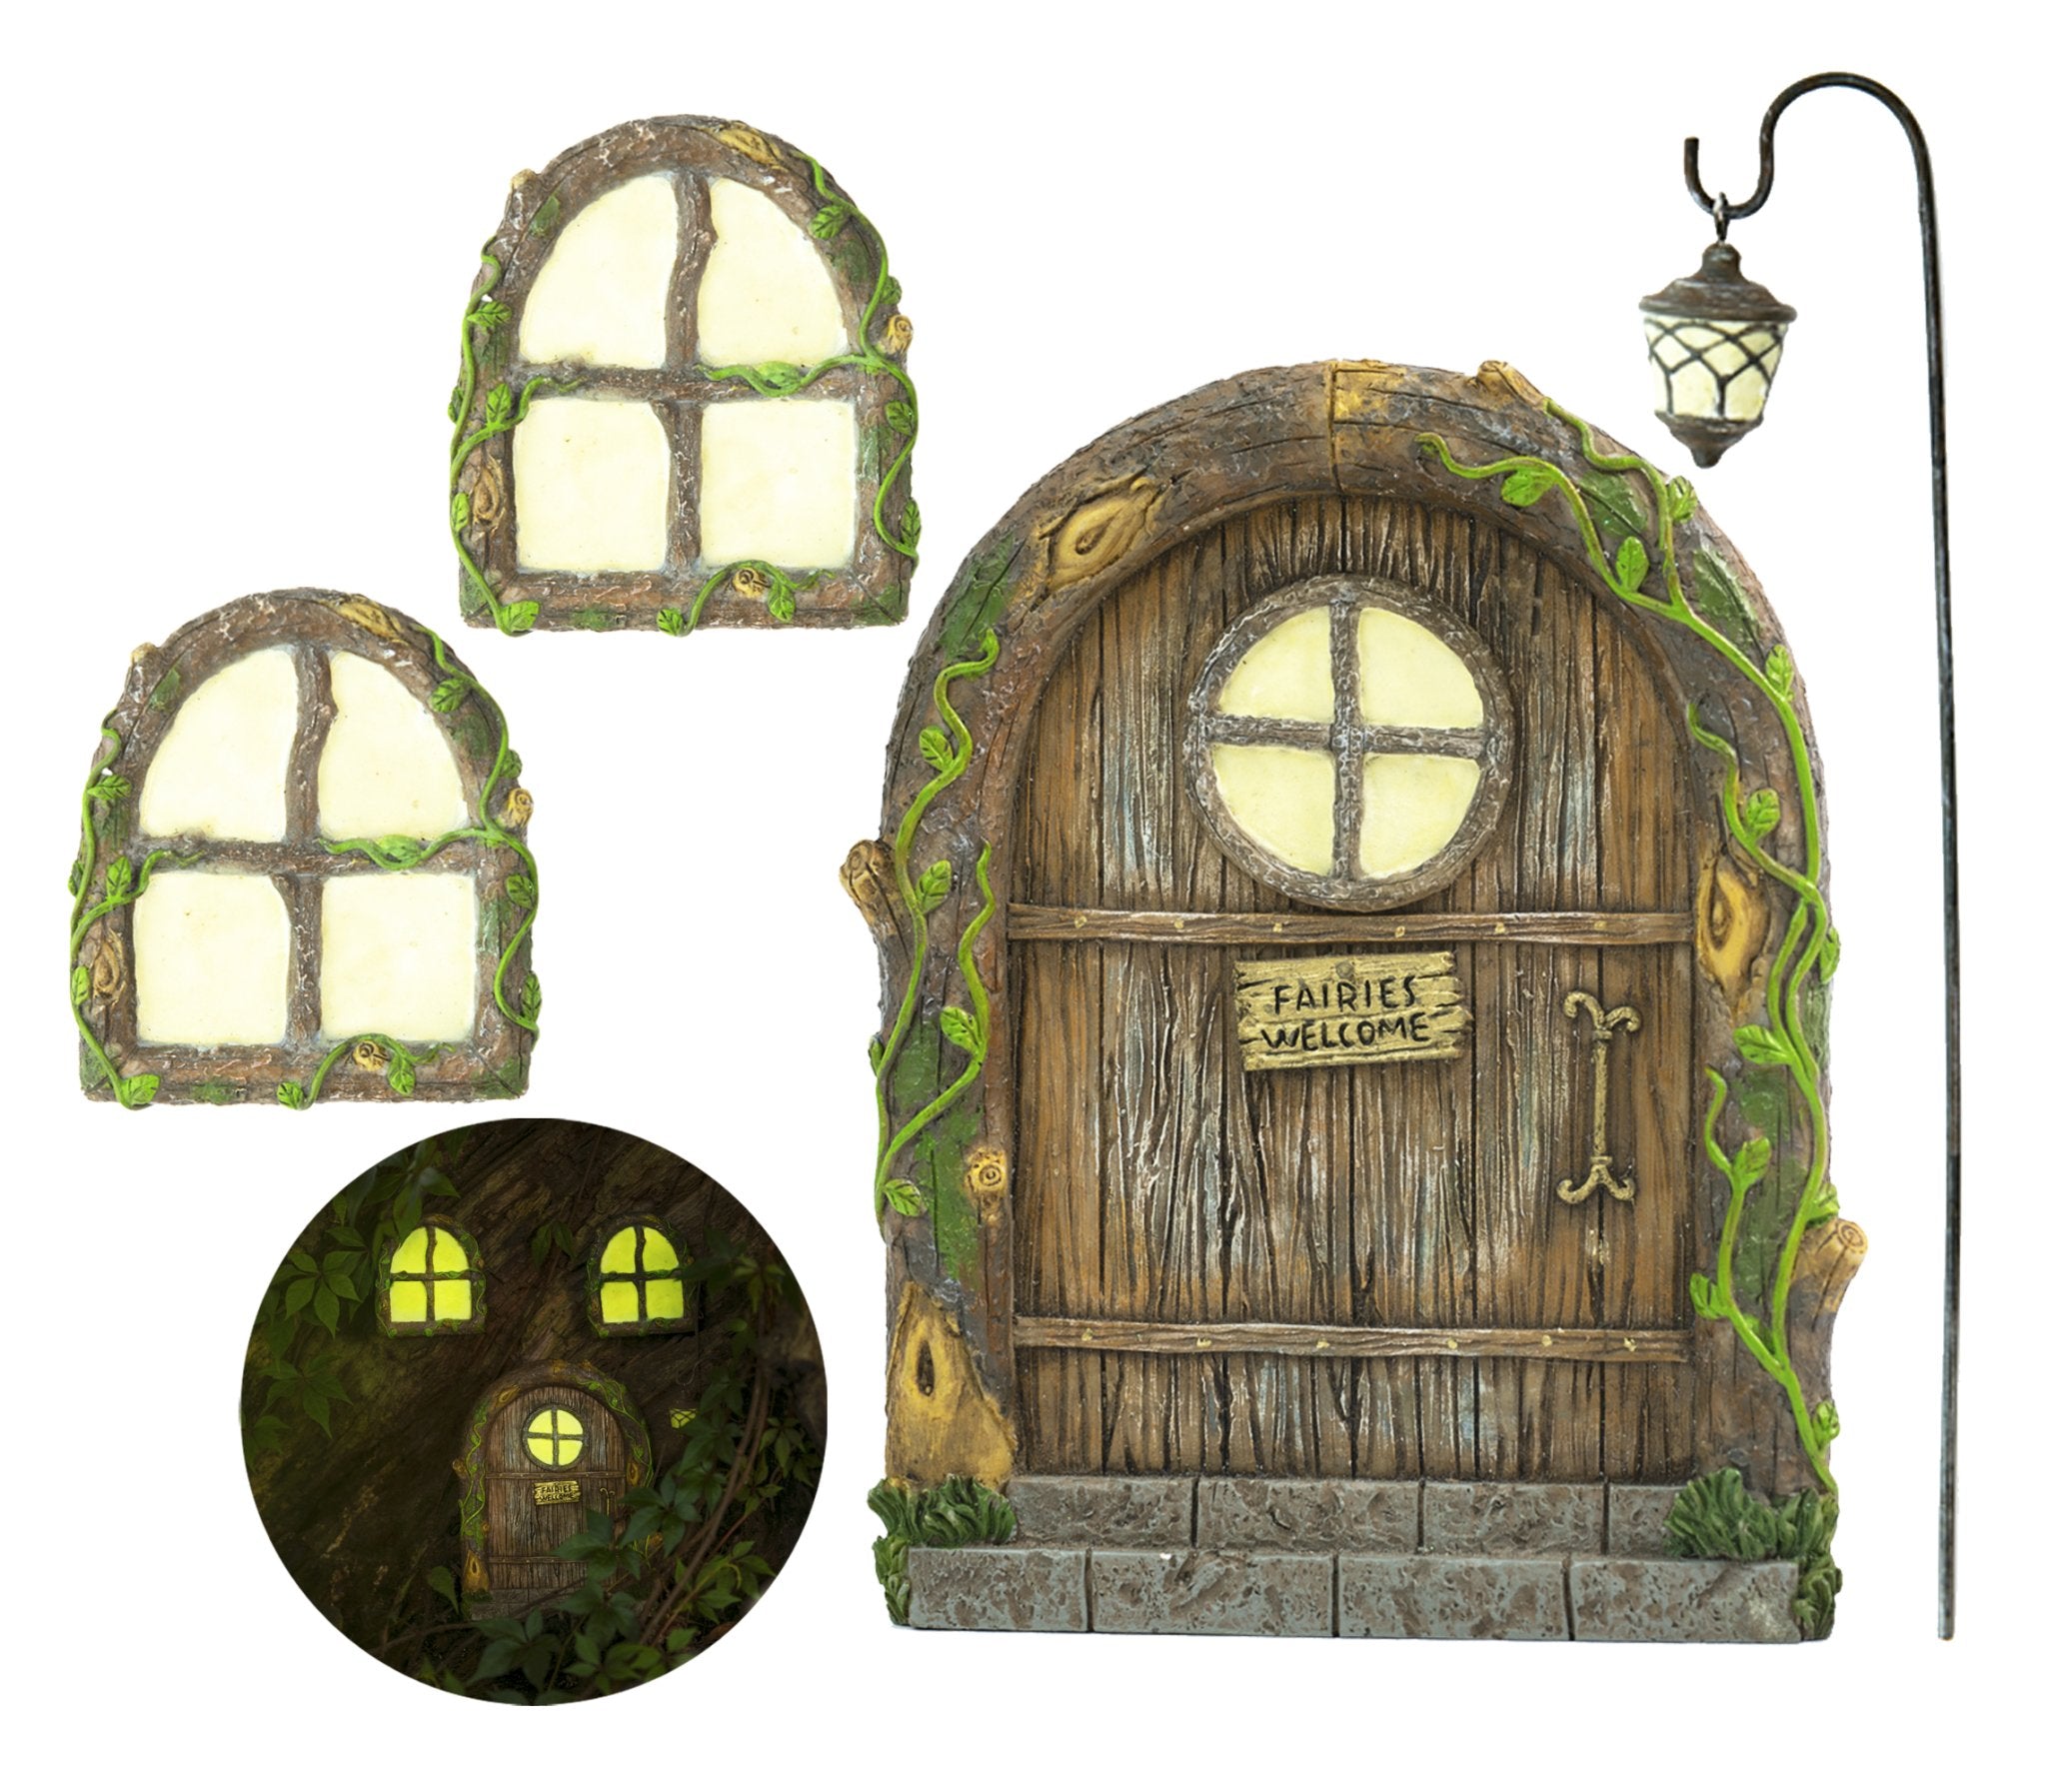 Fairy Door and Windows For Trees – Glow In The Dark Yard Art - Spiral Circle